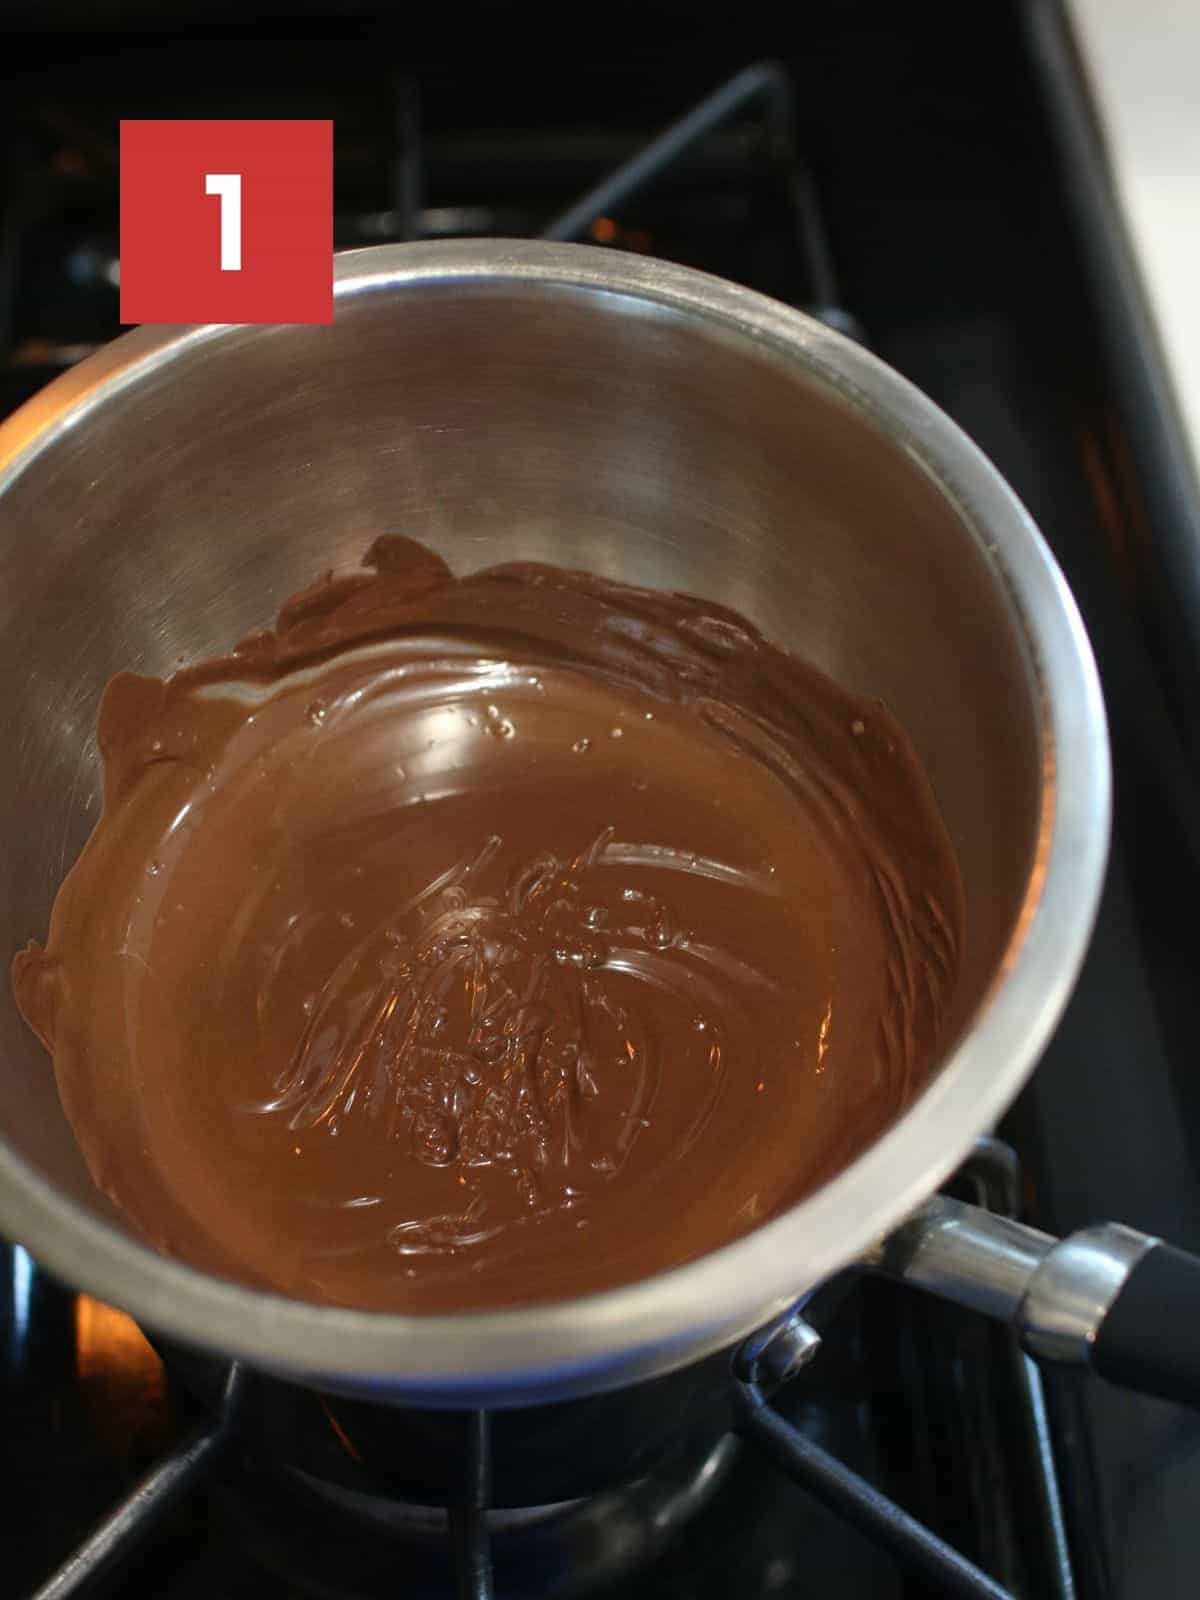 A small metal bowl set up on a double broiler on the stove with melted chocolate. In the upper left corner is a dark red square with a white '1' in the center.